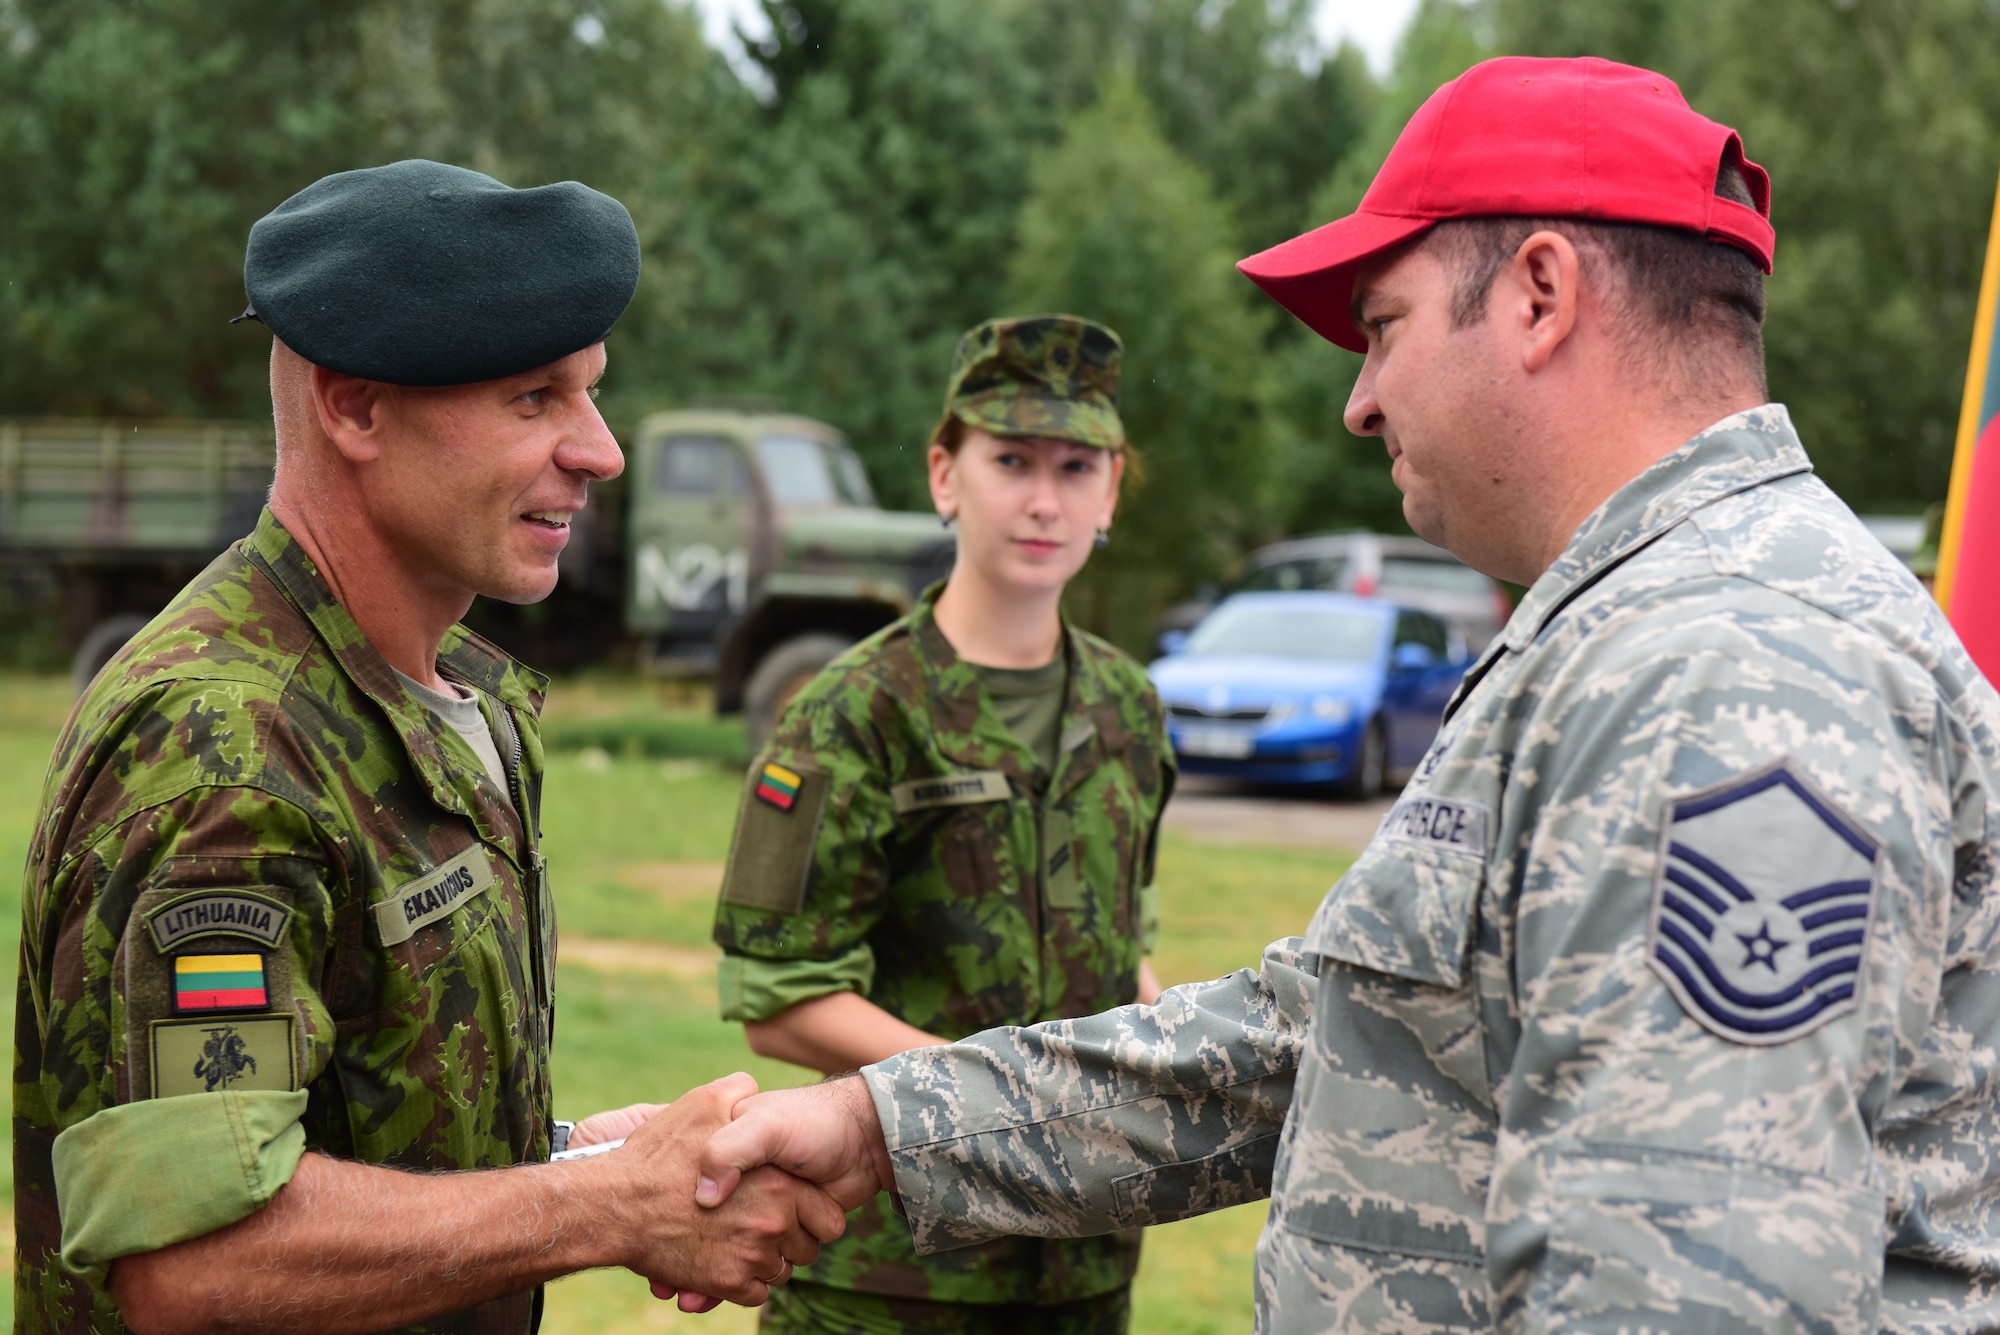 Lithuanian Maj. Kestutis Cekavicius (left), training area commander at the Brigadier General Kazio Veverskis Training Grounds, Kazlu Ruda, Lithuania, thanks U.S. Air Force Master Sgt. Andrew Hikes, 201st Rapid Engineer Deployable Heavy Operational Repair Squadron Engineers non-commissioned officer in charge of Rotation 2, during a ceremony on the rotation’s last day in Lithuania, Aug. 13, 2018. This is the second of four 201st RHS rotations traveling to Lithuania completing deployment for training and constructing a military air-to-ground training range to be used by Lithuanian and other NATO forces. (U.S. Air National Guard photo by Tech. Sgt. Claire Behney/Released)